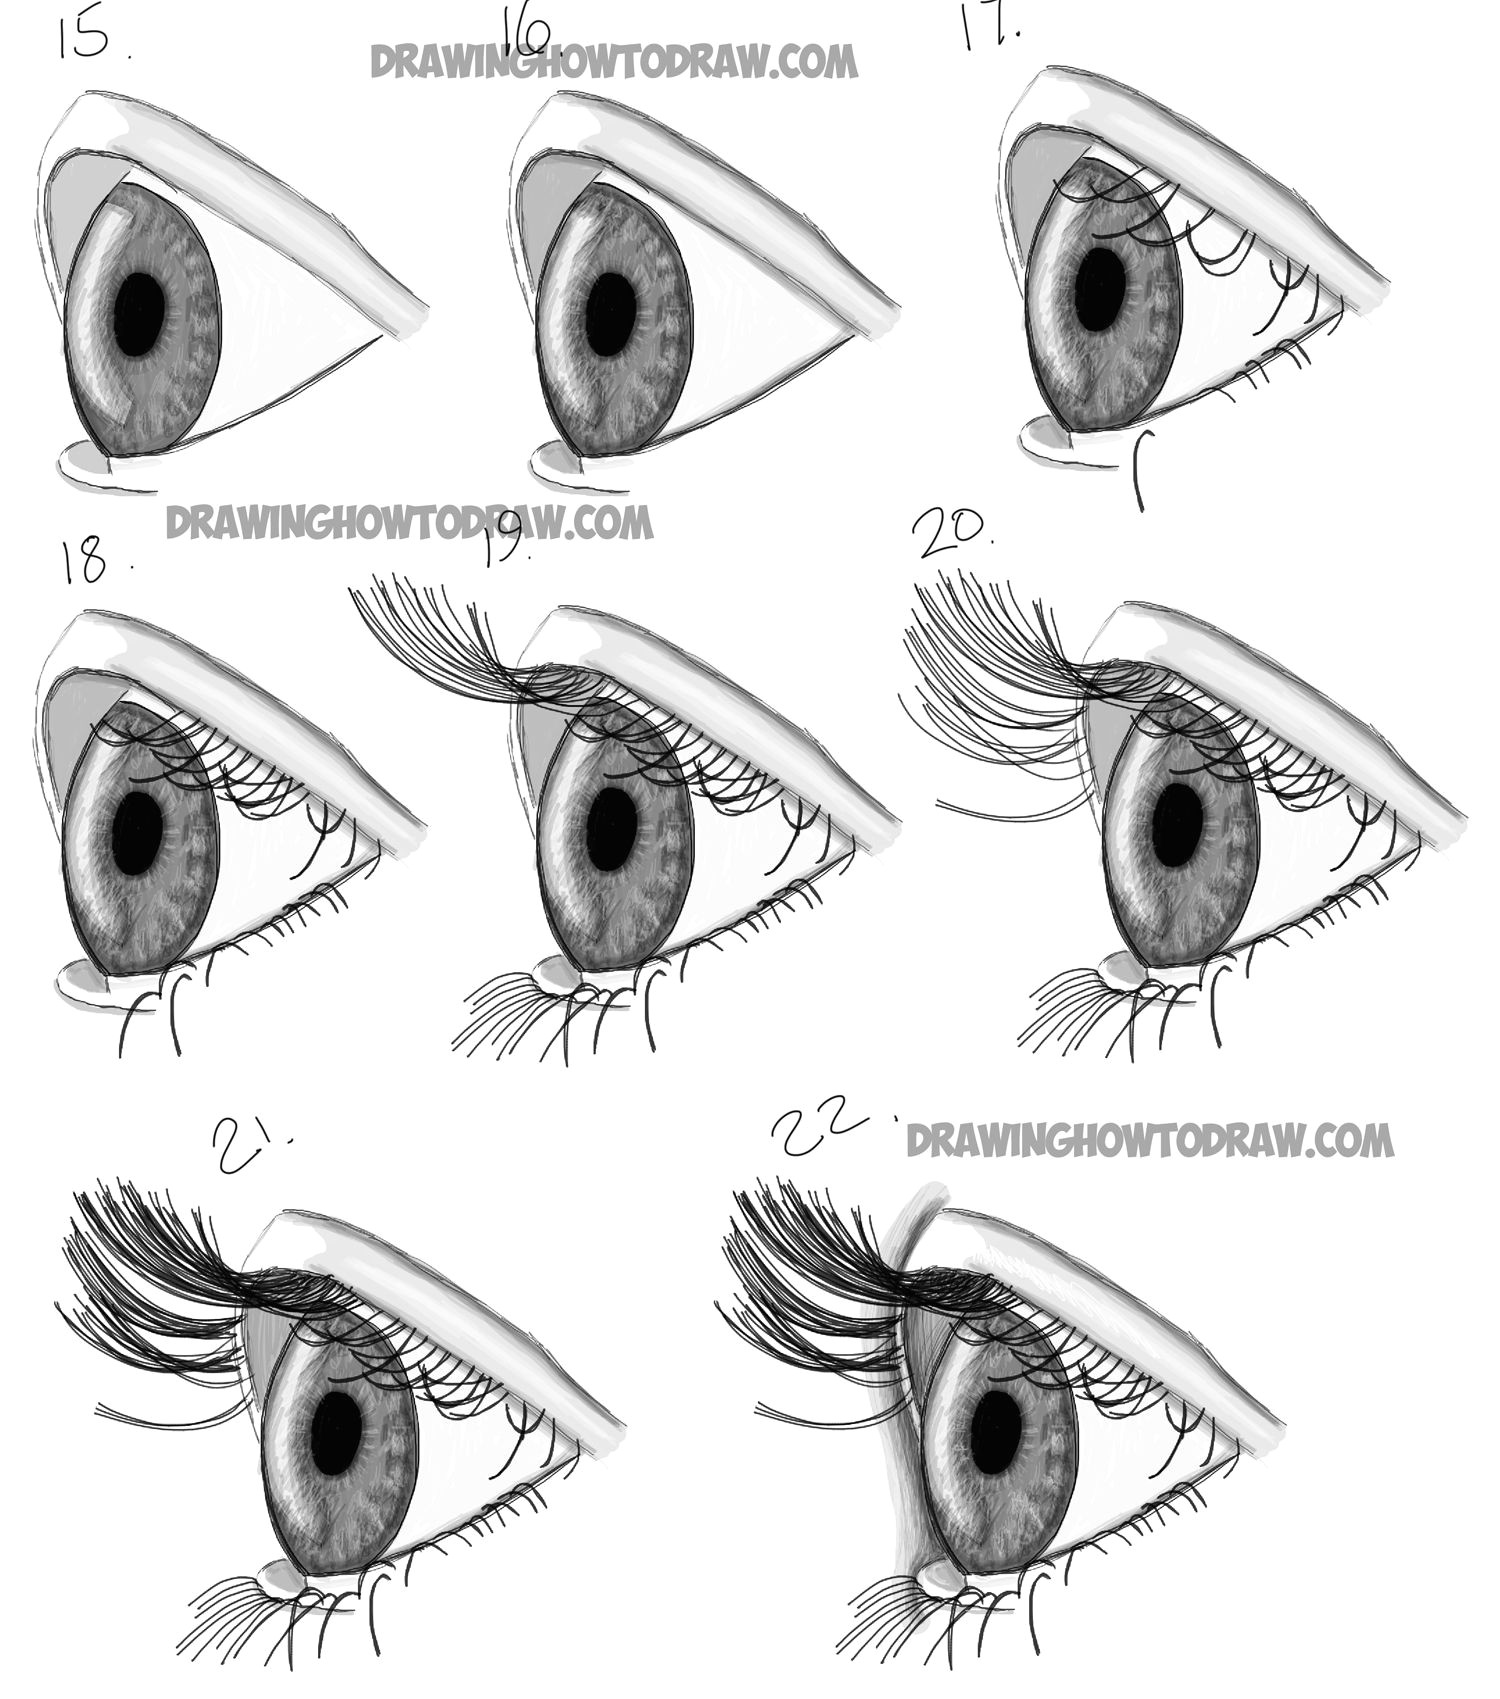 Pencil Drawings Of Eyes Step by Step How to Draw Realistic Eyes From the Side Profile View Step by Step